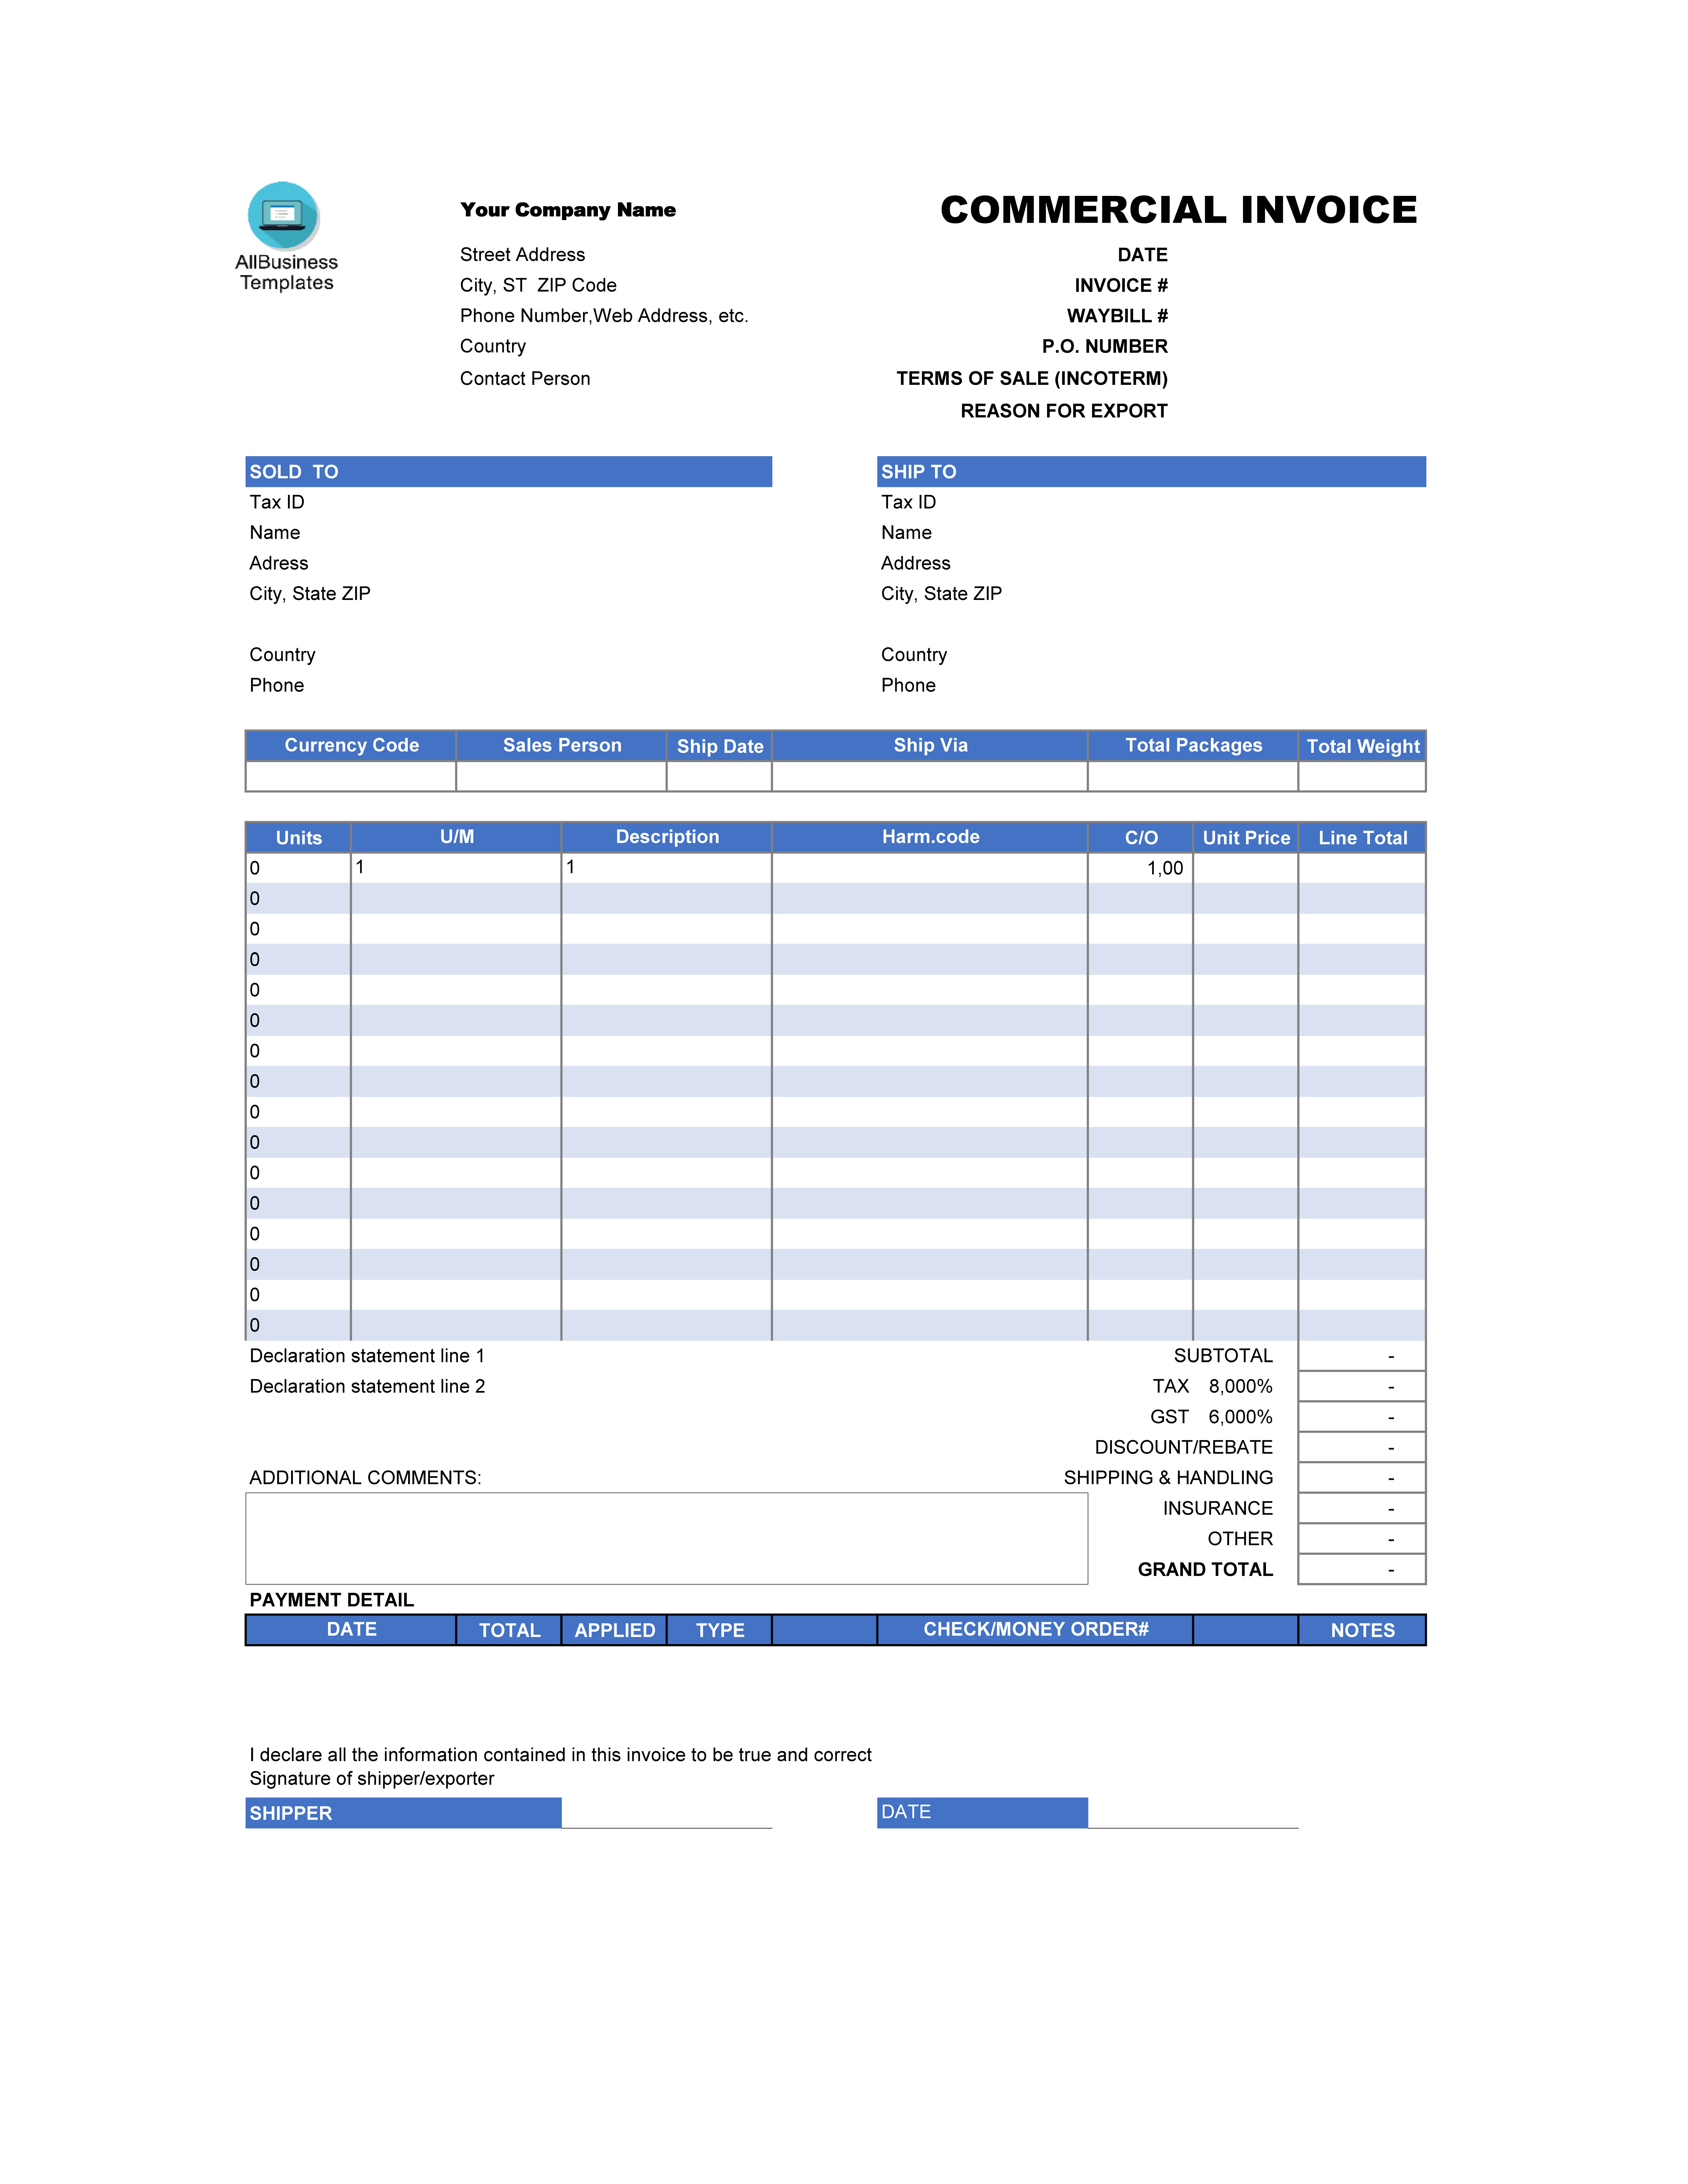 Commercial Invoice Excel Templates at